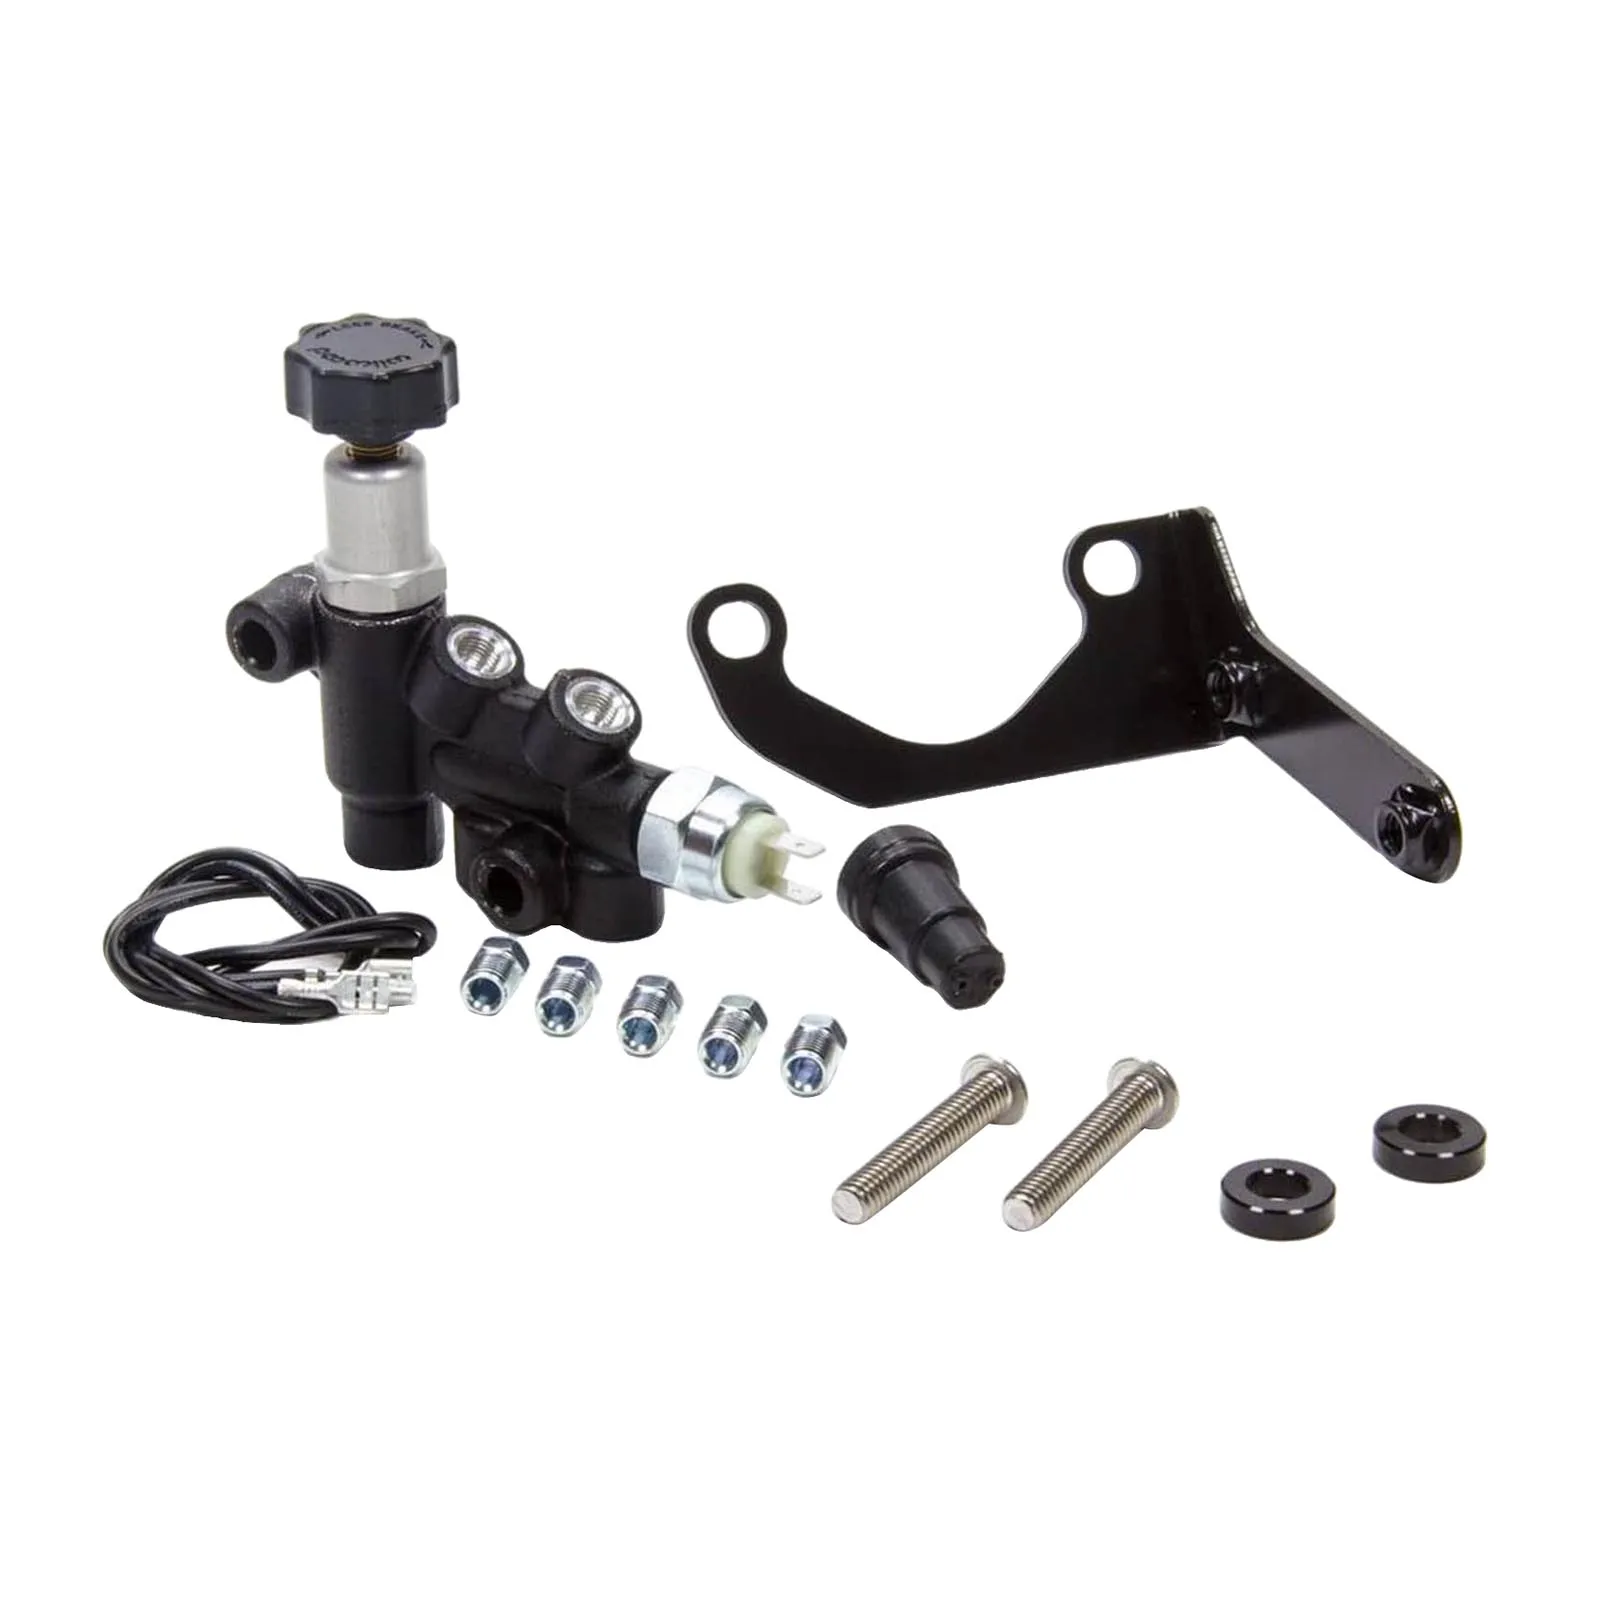 Proportioning Valve Lines Kit for 260-13190 260-11179 Accessories